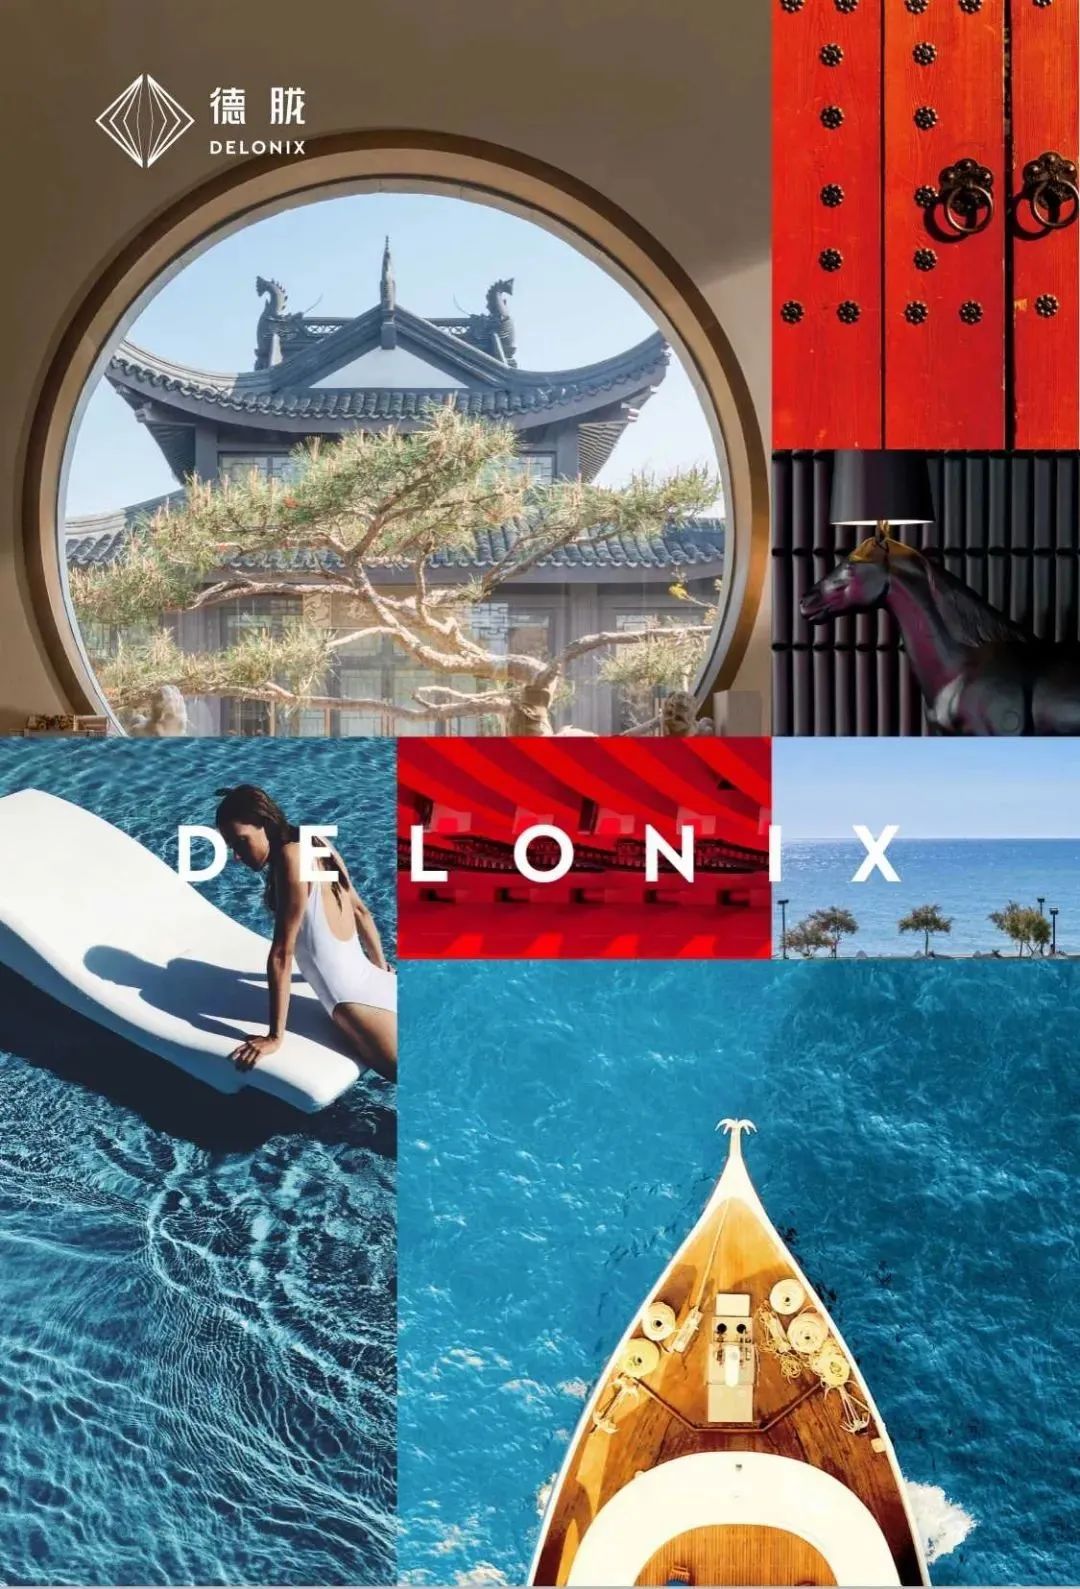 Delonix--The Hospitality Game Changer with Its Innovative Talent Strategy